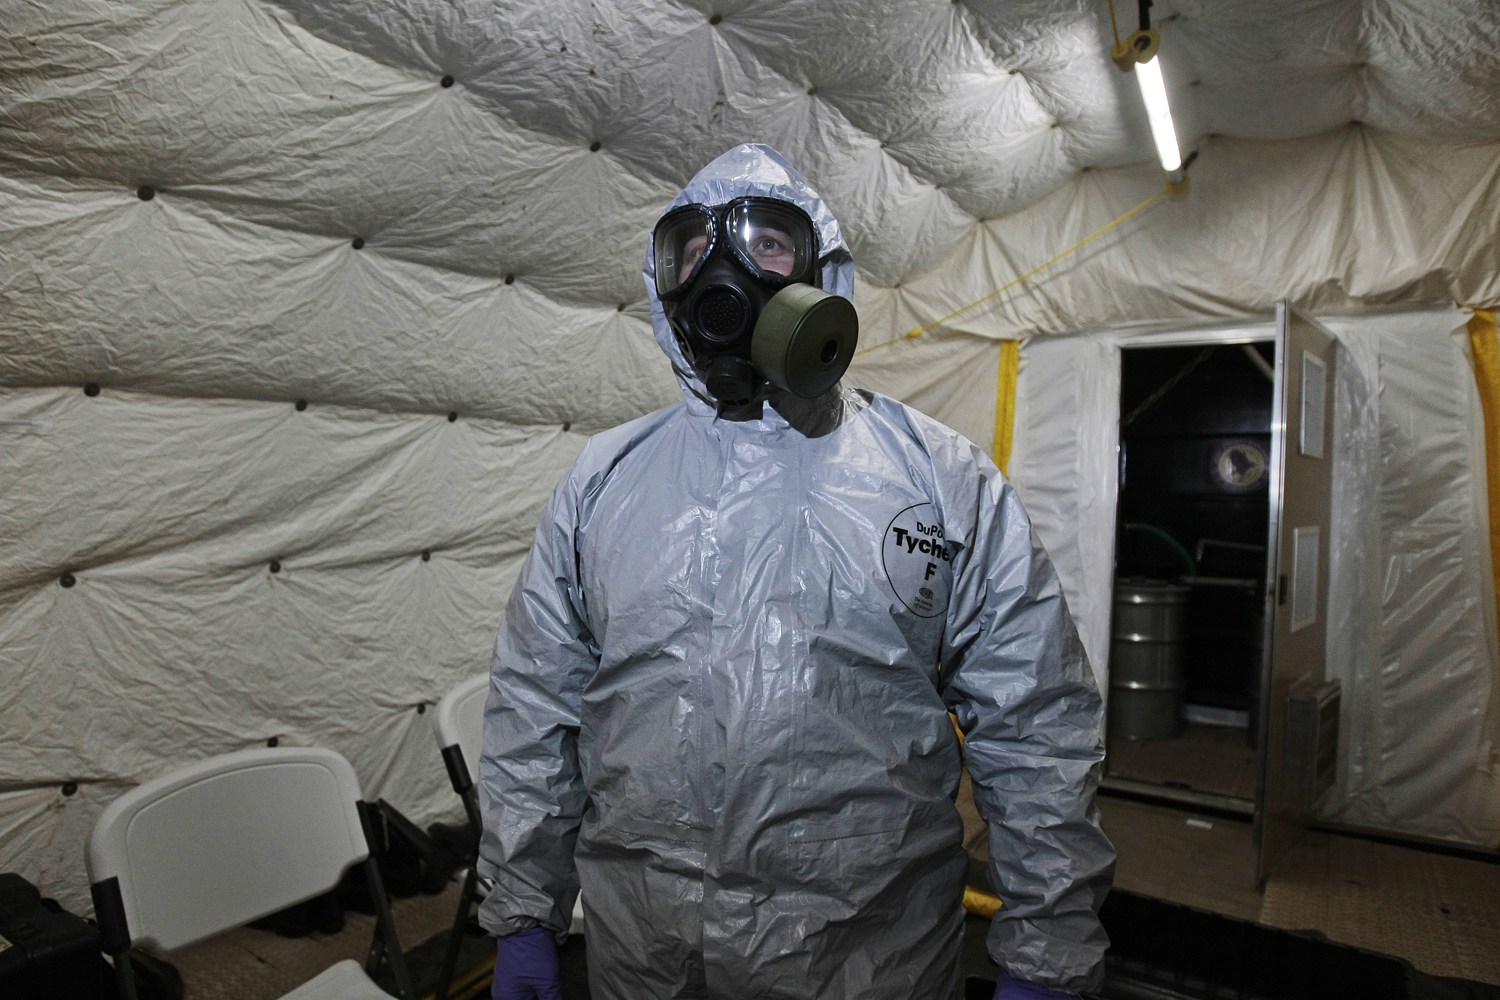 A marine officer of the Cape Ray, a ship equipped to neutralize Syrian chemicals, shows a chemical protection suit  to reporters during a tour around the ship docked at the naval base of Rota used by the U.S, in Spain’s southwestern coast on April 10, 2014. (Alfonso Perez—AP)